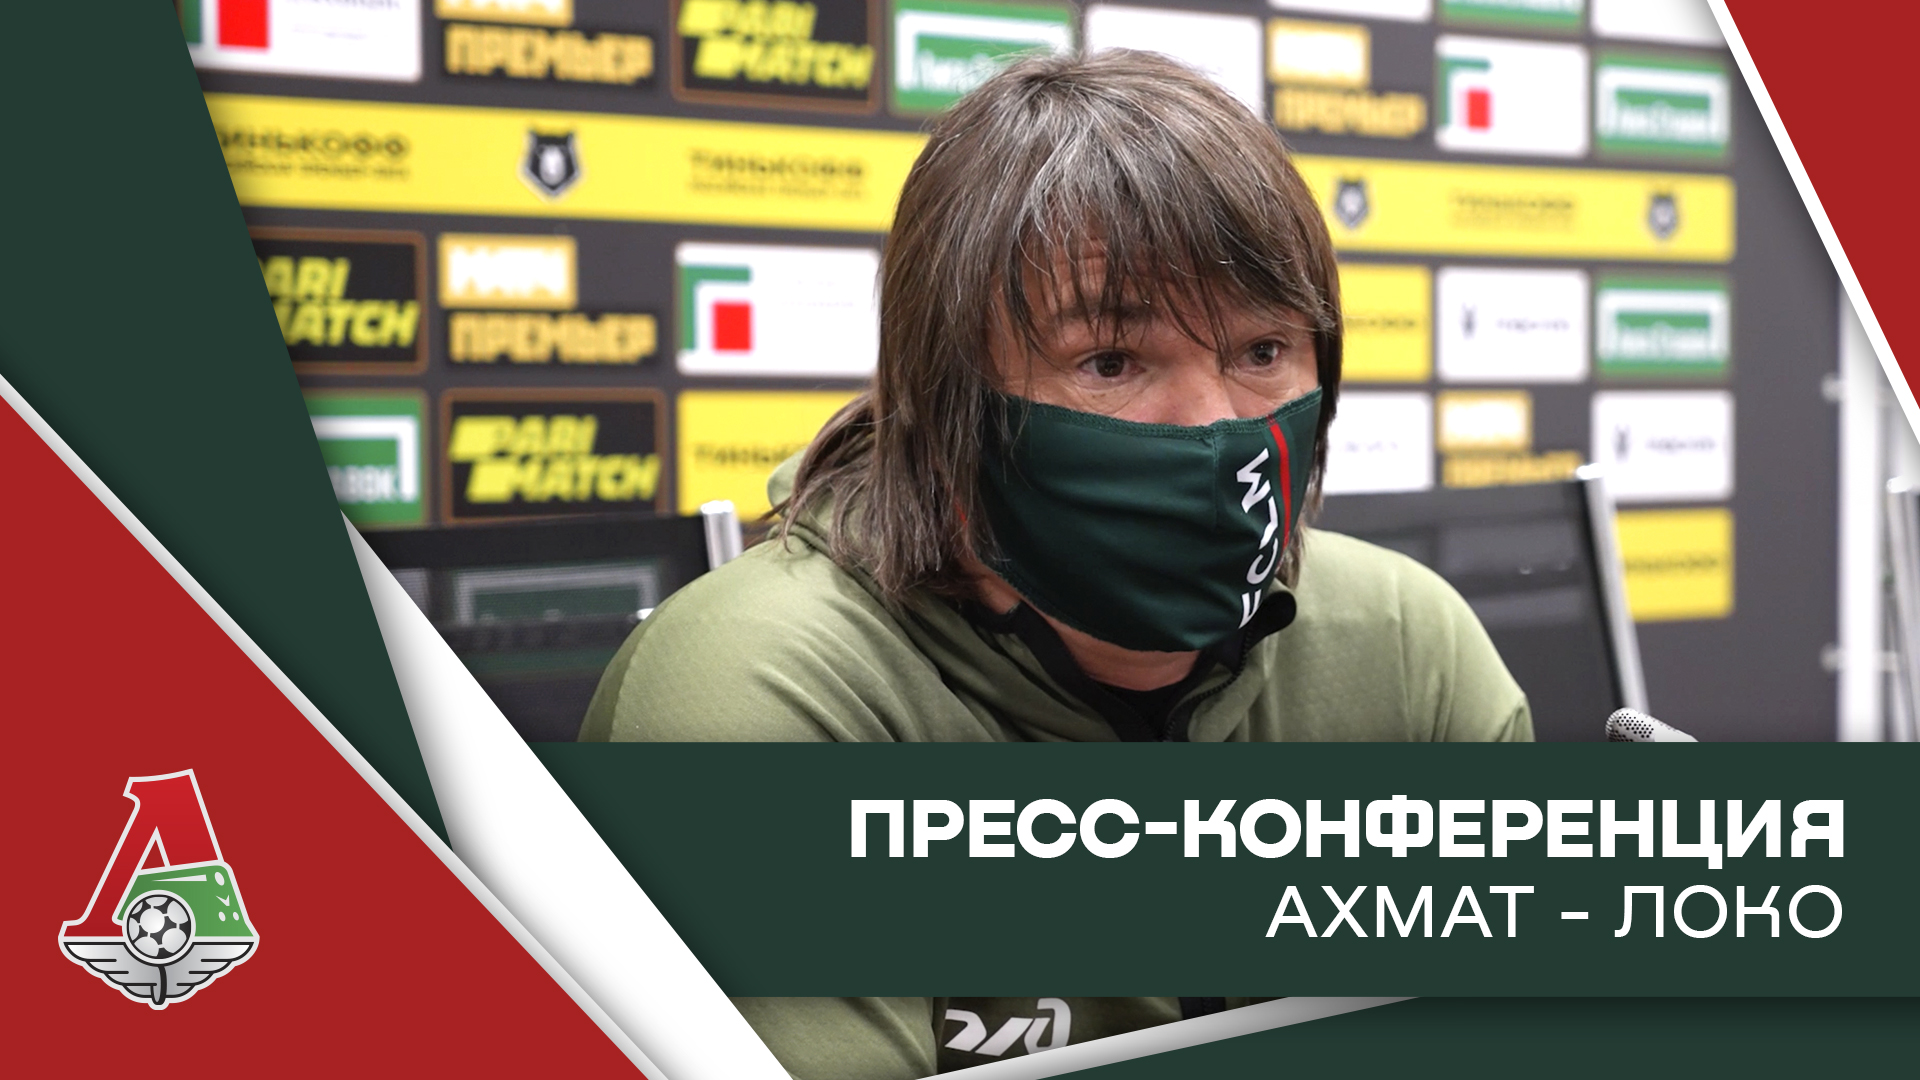 Dmitriy Loskov press-conference after the match against Akhmat